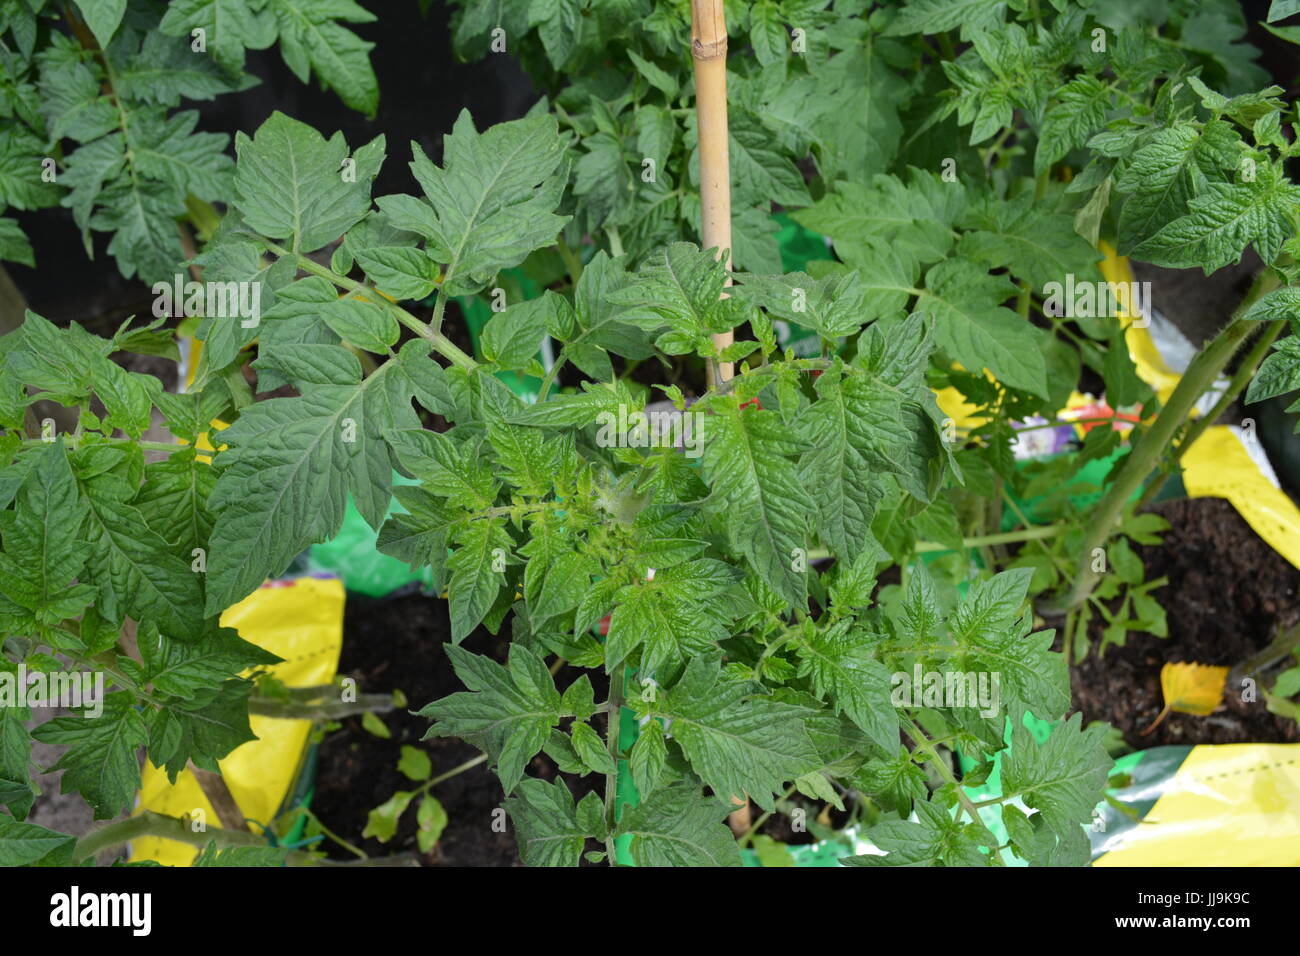 Young tomato plants growing in growbags in garden re bamboo supports canes fruit Stock Photo